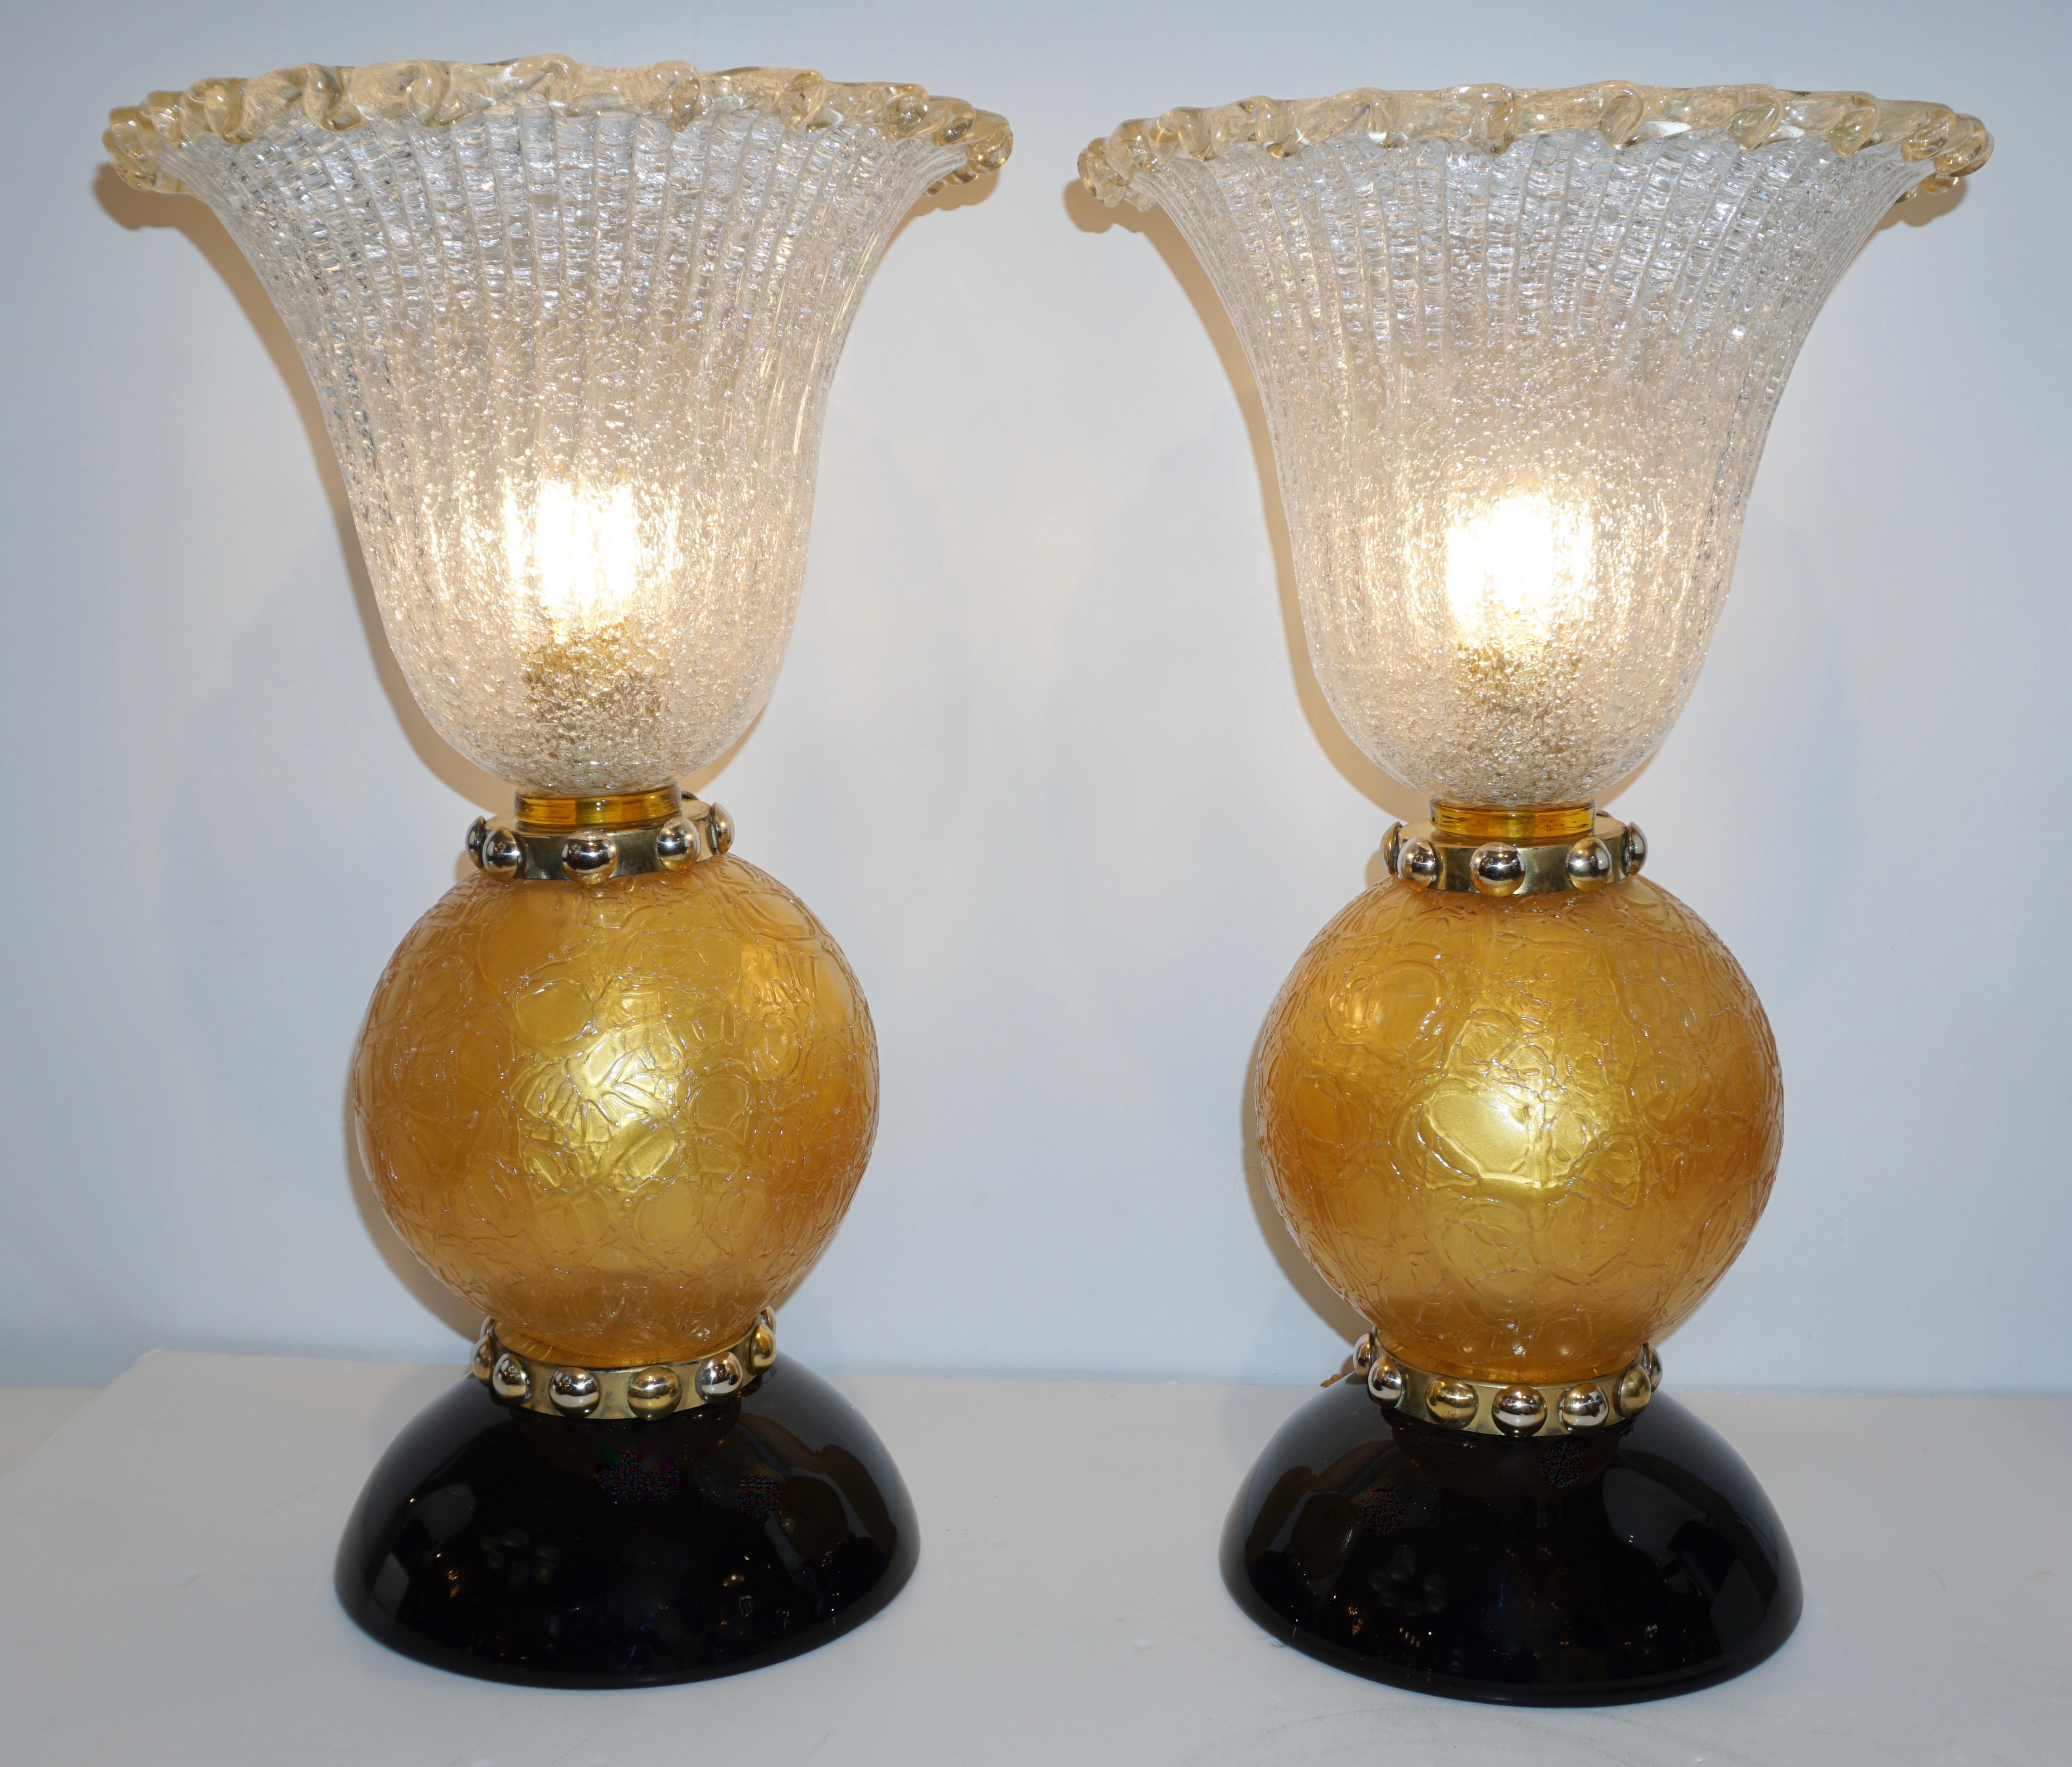 These lamps with Art Deco Design and Hollywood Regency flair are an exclusive vintage creation of the 1970s. The organic rounded design is enhanced by details of high quality craftsmanship: the bodies consist of crystal clear overlaid Murano glass